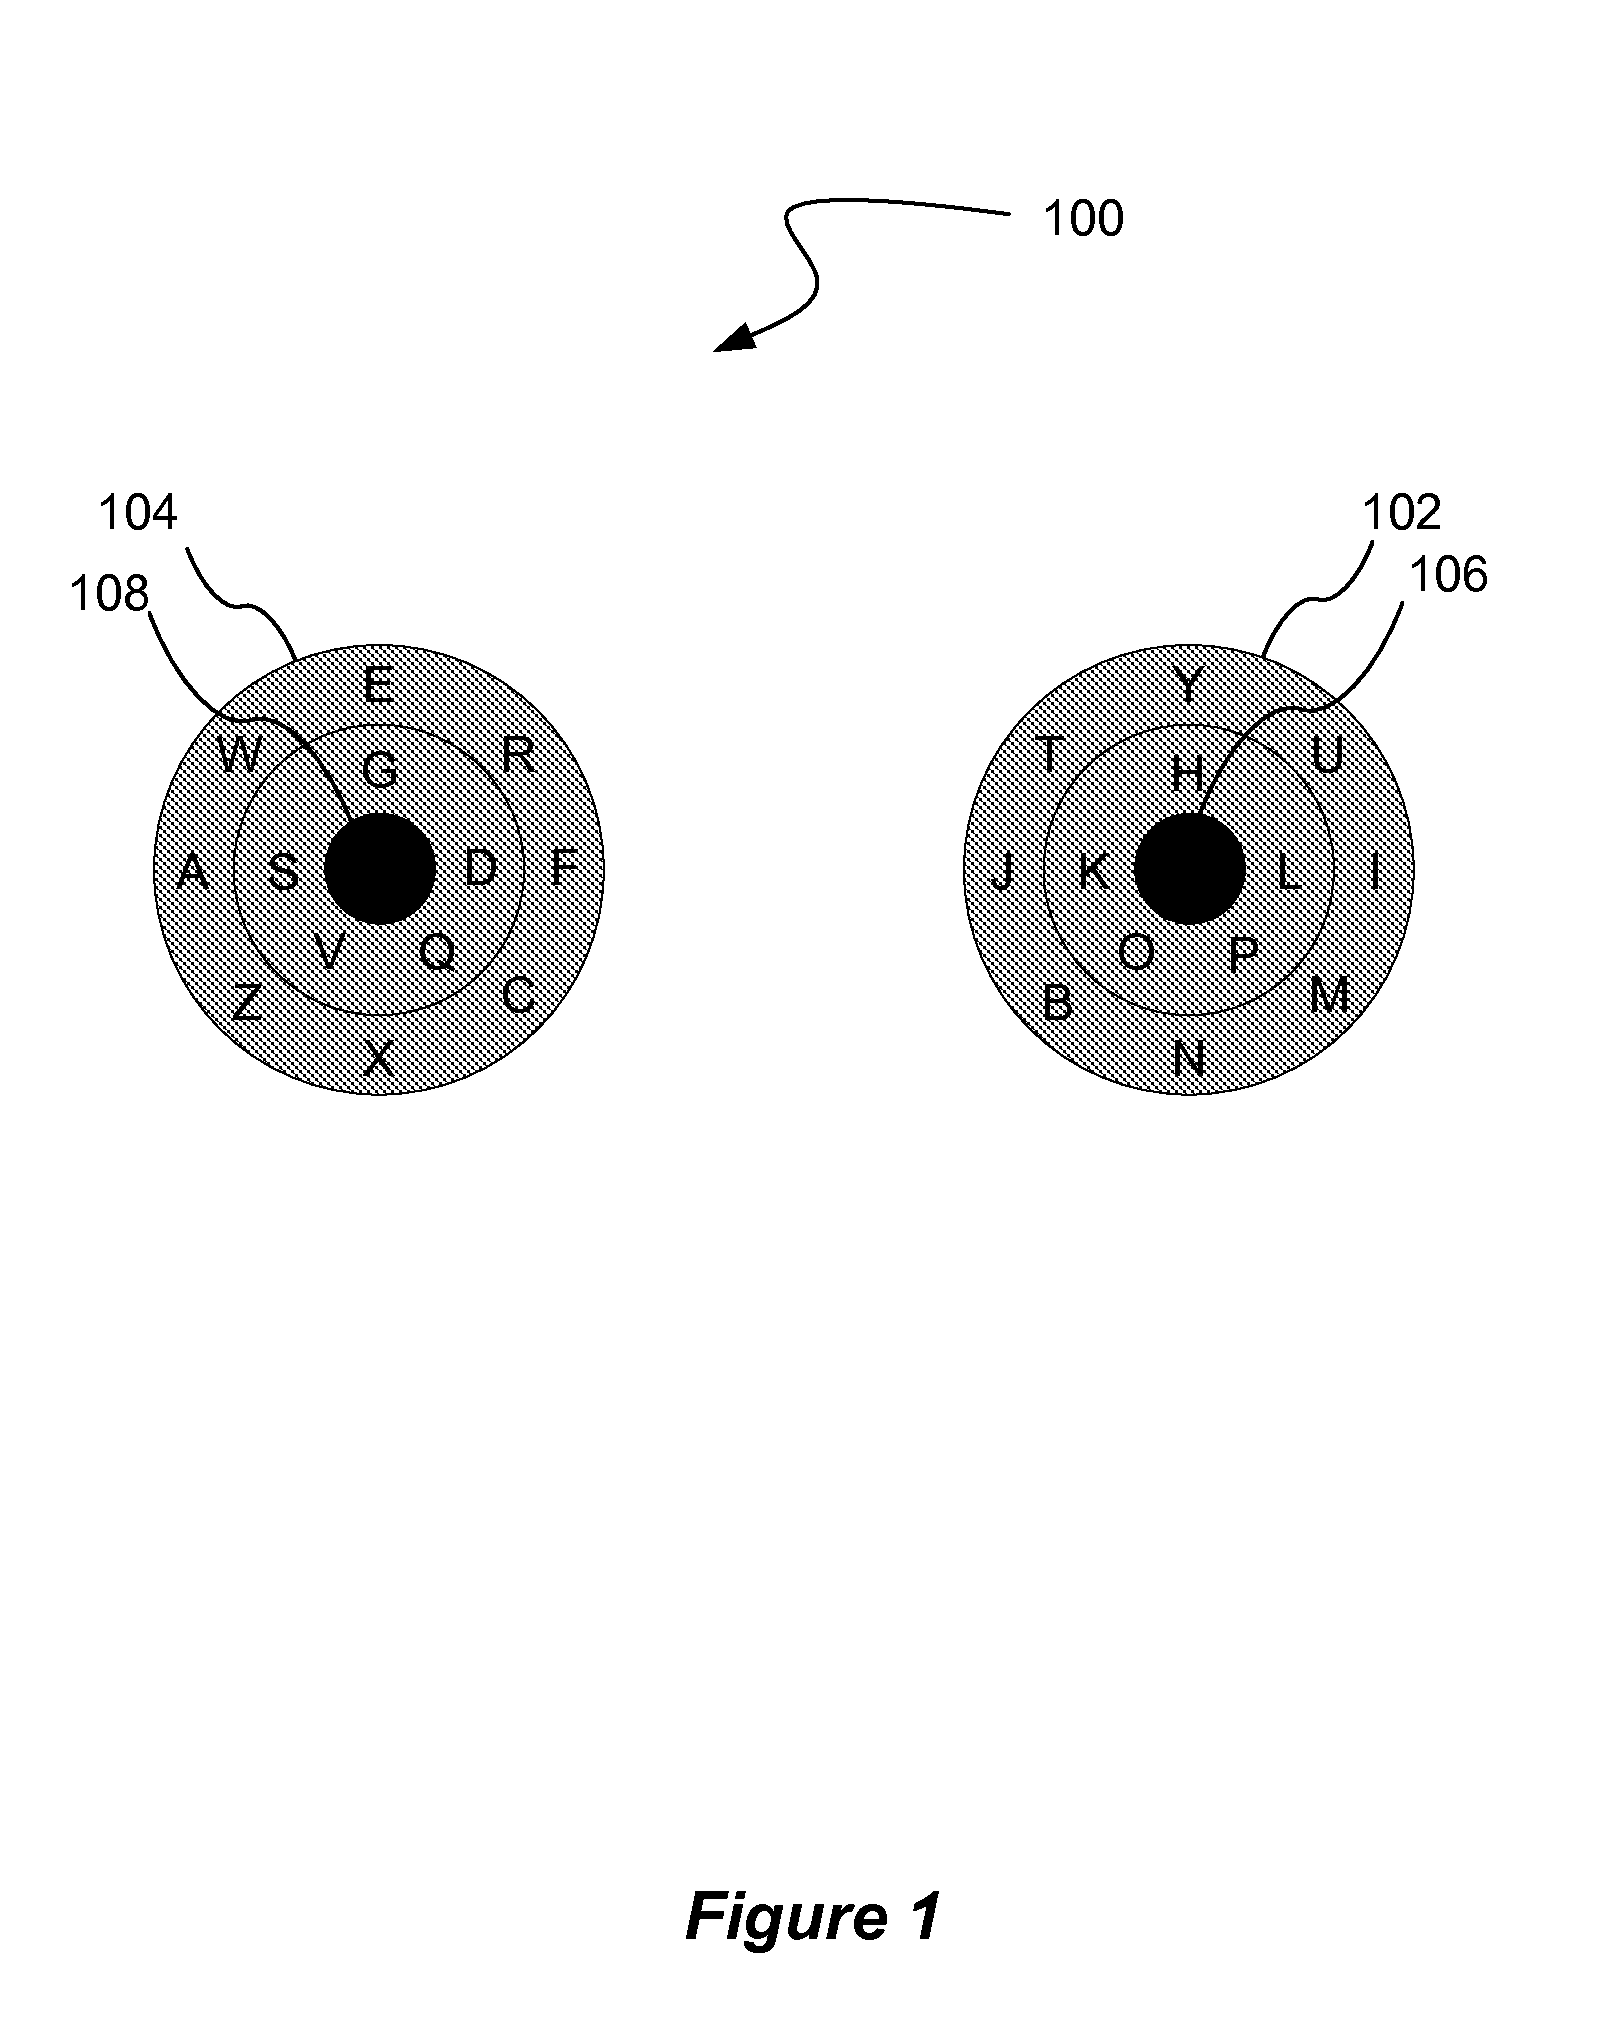 Dual touch pad interface for a computing device